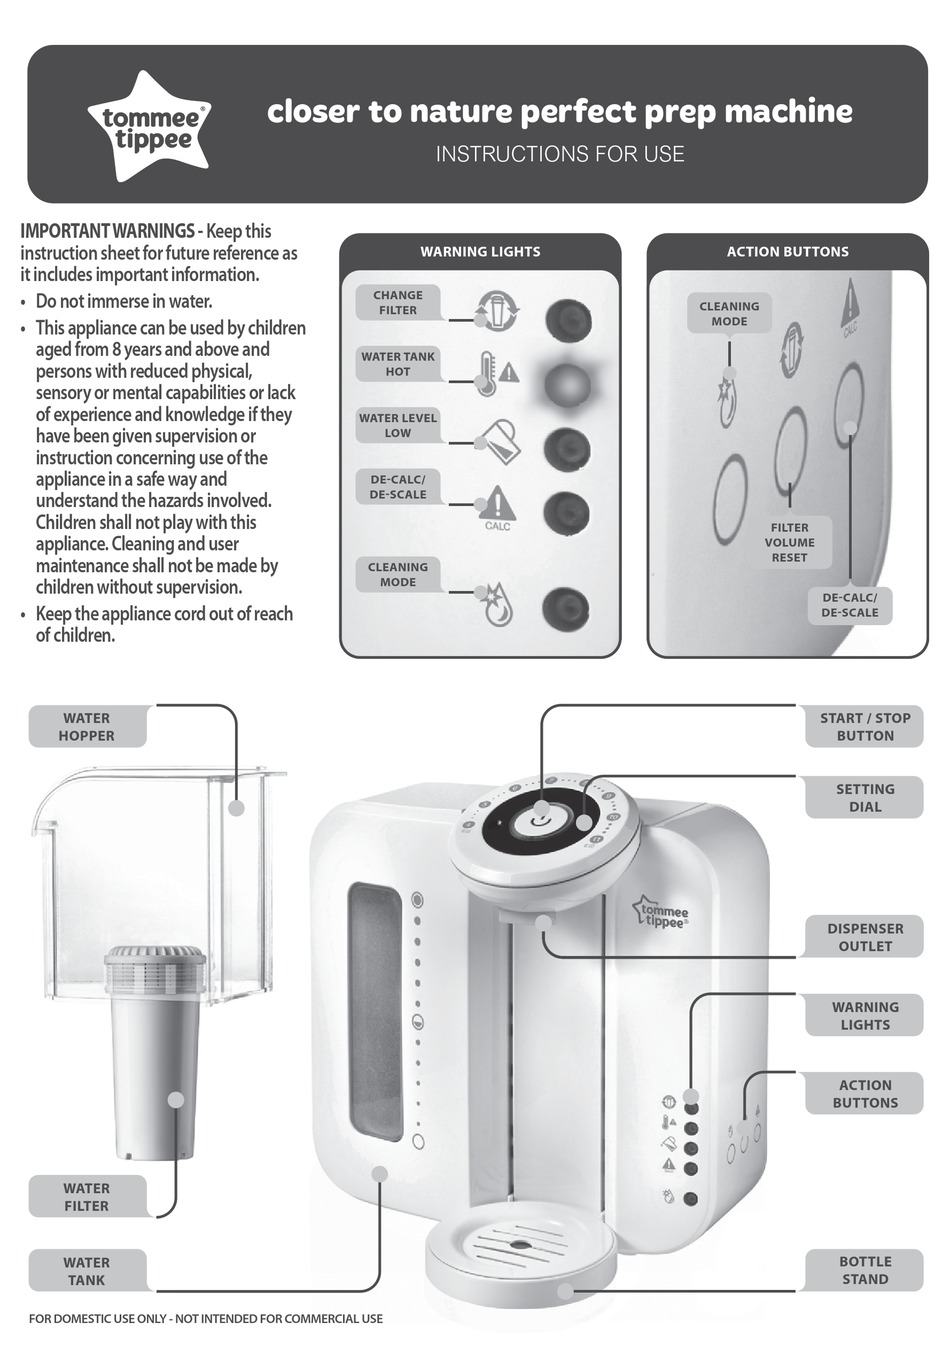 TIPPEE CLOSER TO PERFECT PREP MACHINE INSTRUCTIONS FOR USE Pdf Download | ManualsLib